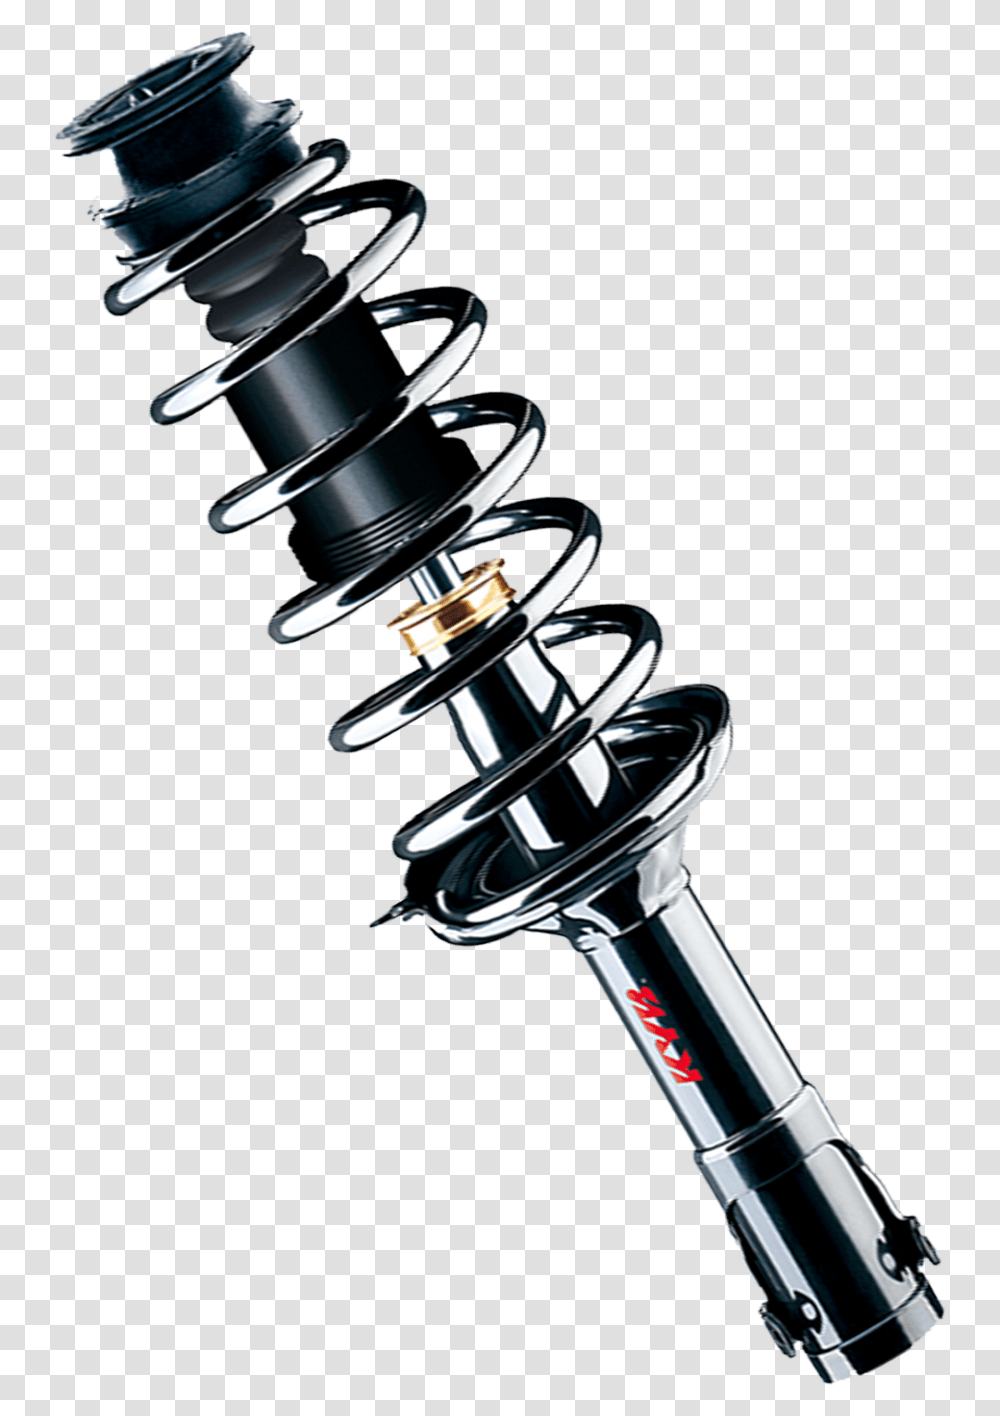 Shock Absorbers Series Shock Absorber Kayaba Brand, Staircase, Machine, Suspension, Handrail Transparent Png